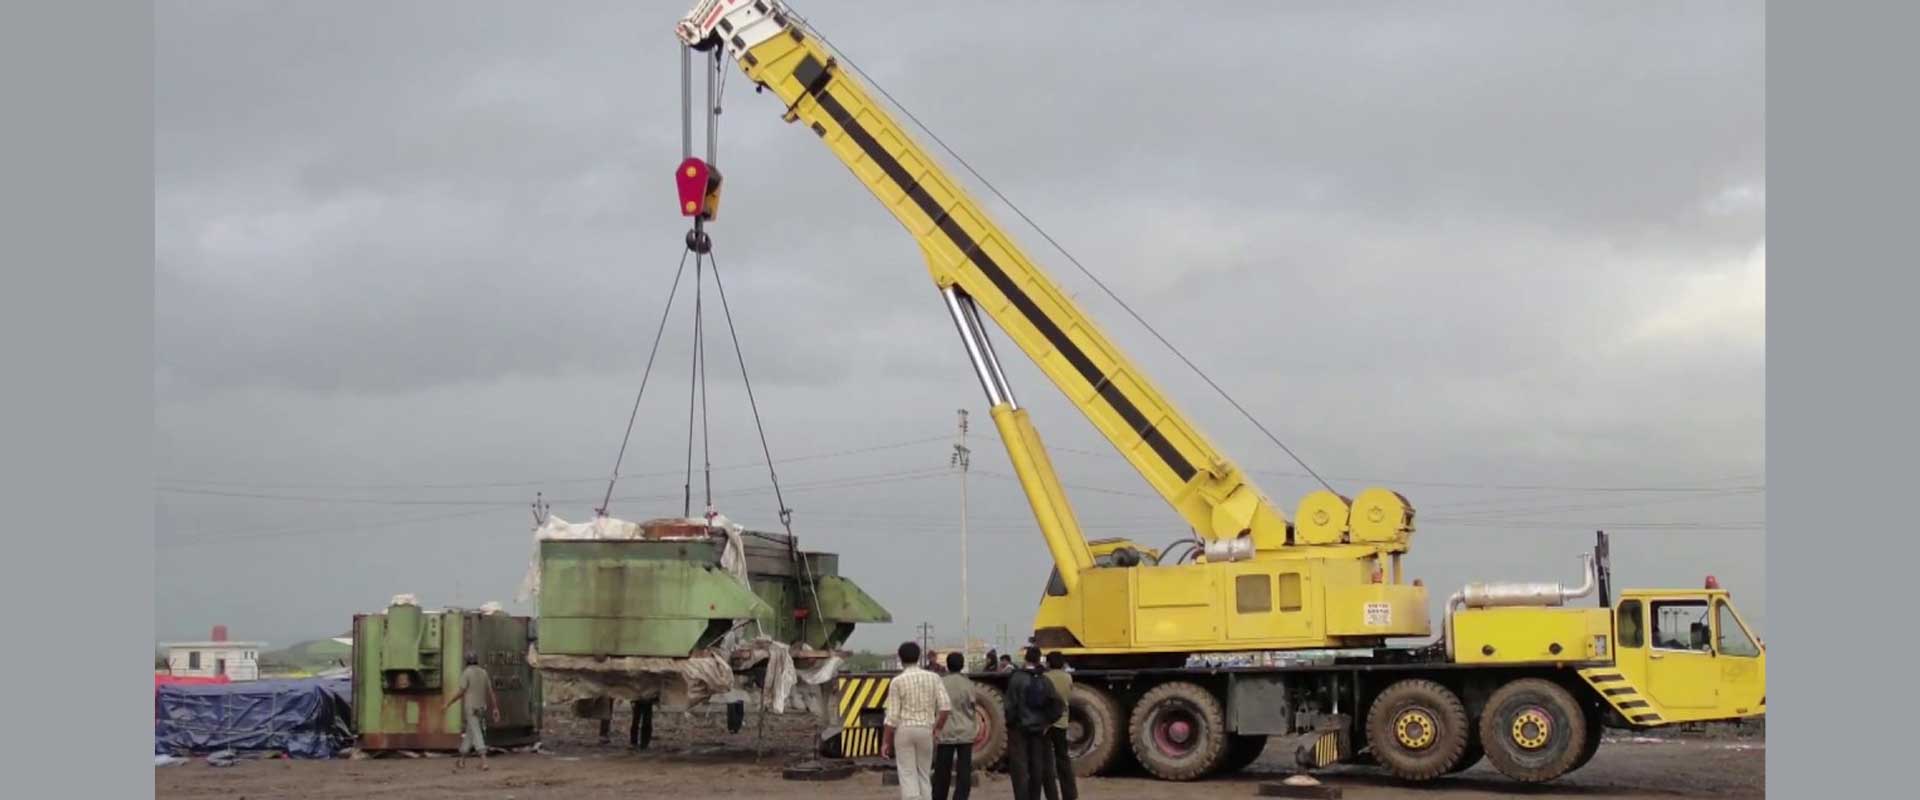 Machinery Erection Services in Pune, India | Jagruti Technical Services Pvt. Ltd